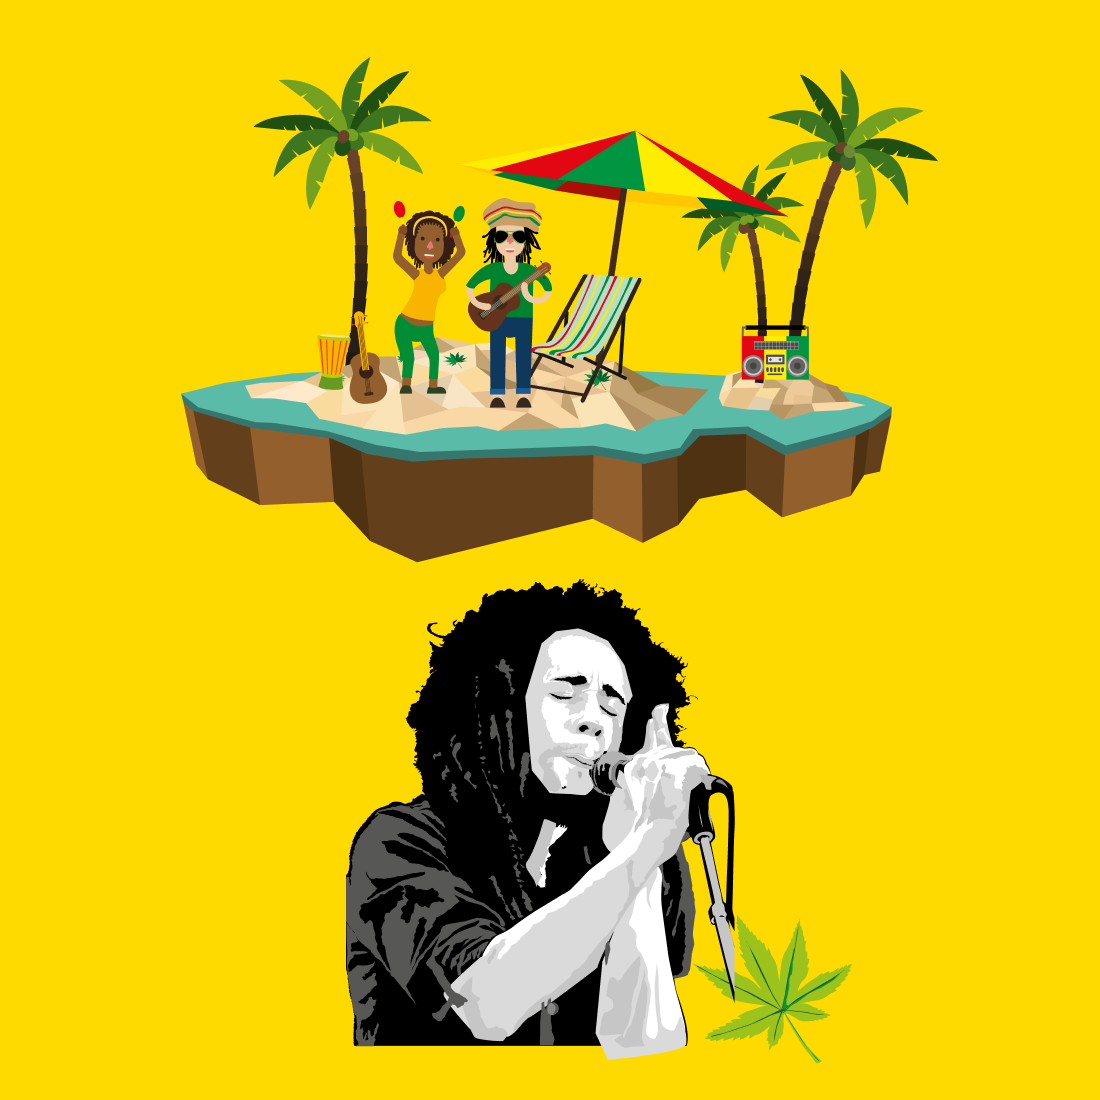 Images with Bob Marley SVG cover.